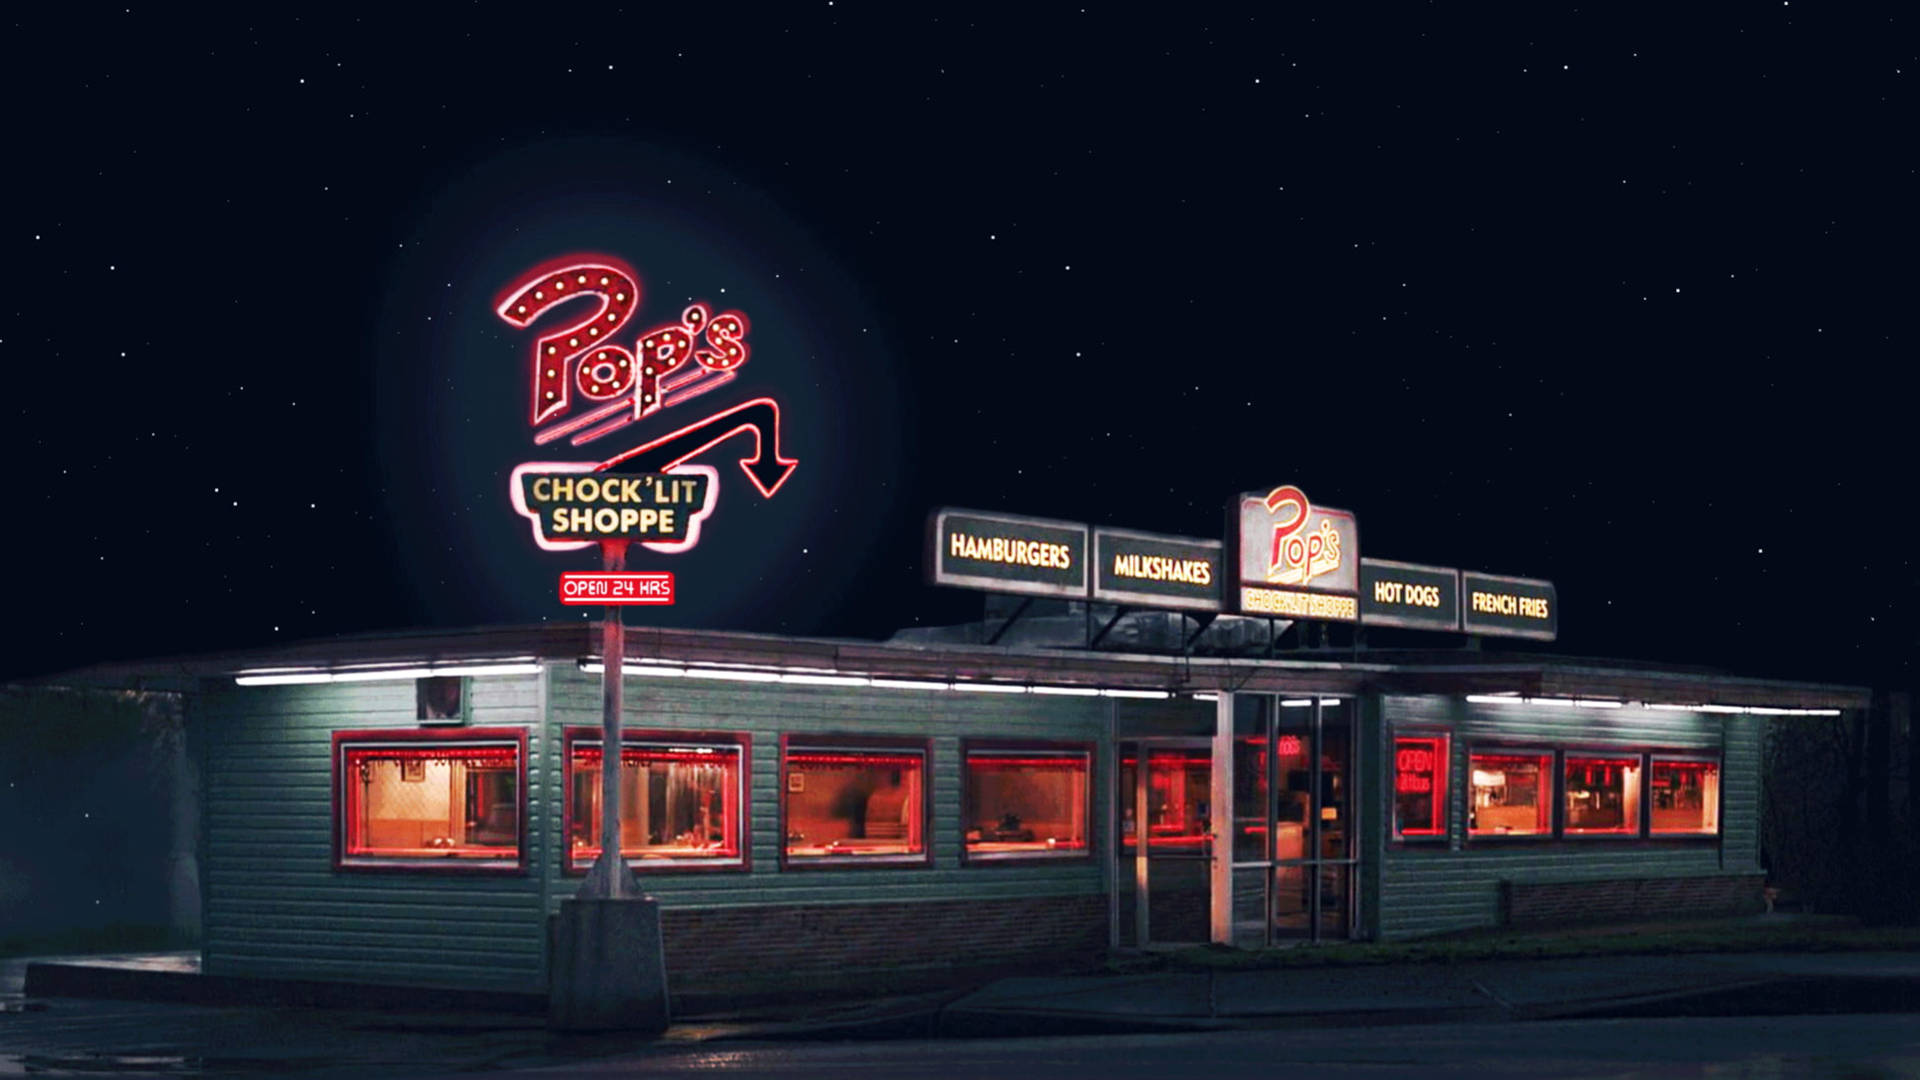 3840X2160 Riverdale Wallpaper and Background